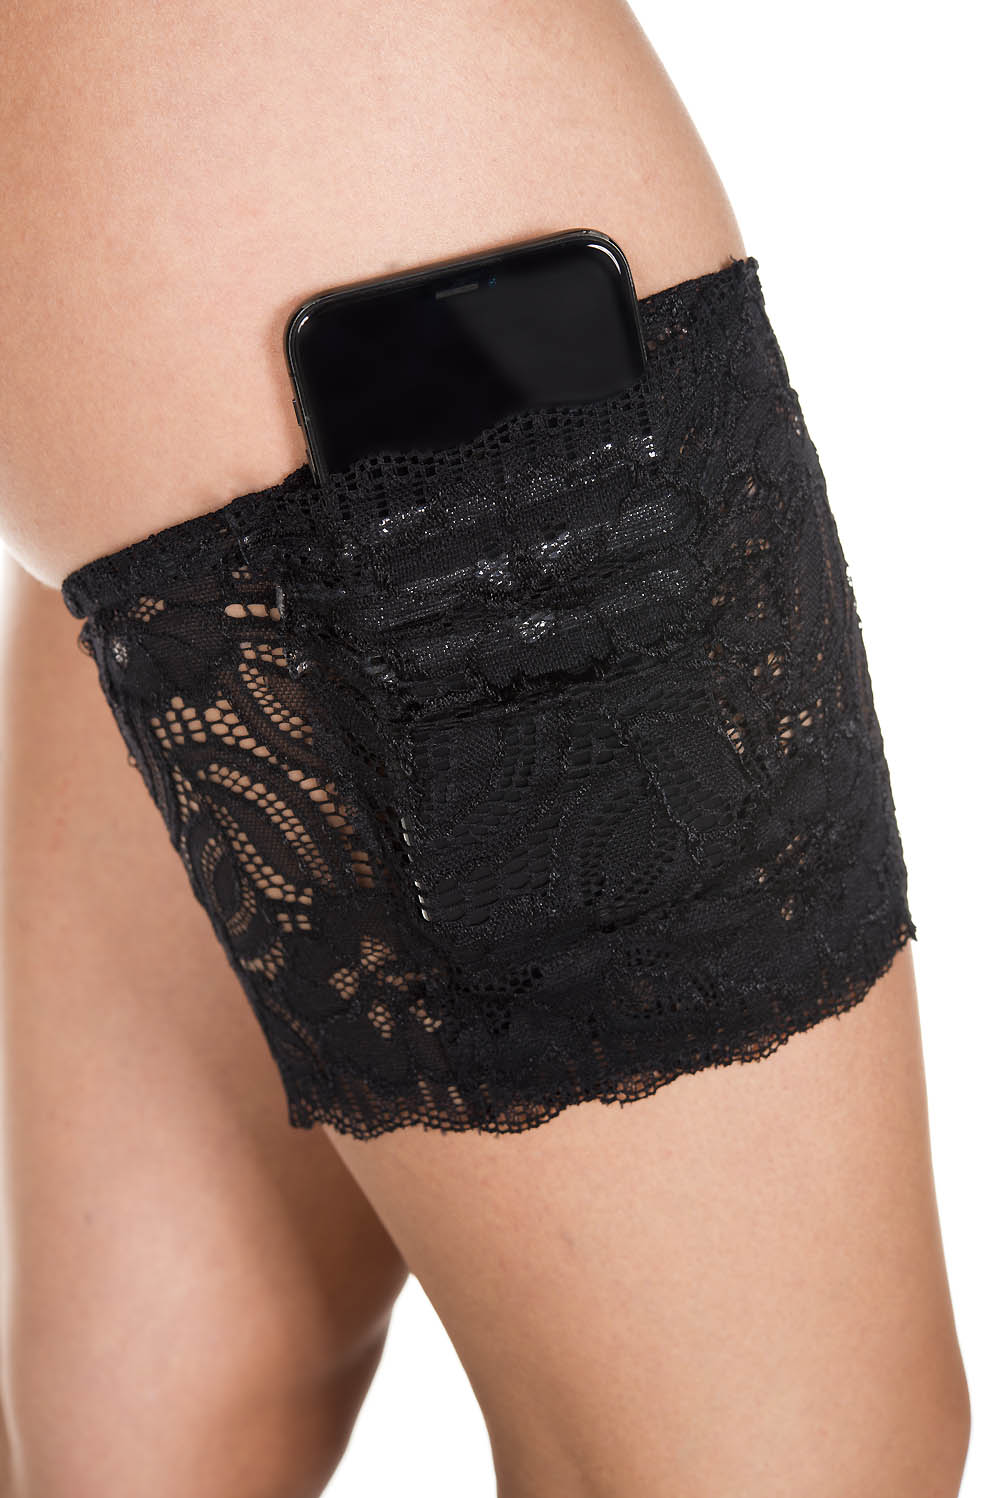 Music Legs 43004 Lace Garter Pocket - Black floral lace thigh band (garter) with elasticated edge and a strip of silicone, 2 internal pockets, one pocket is perfect for storing your phone and the other for a key or money notes.